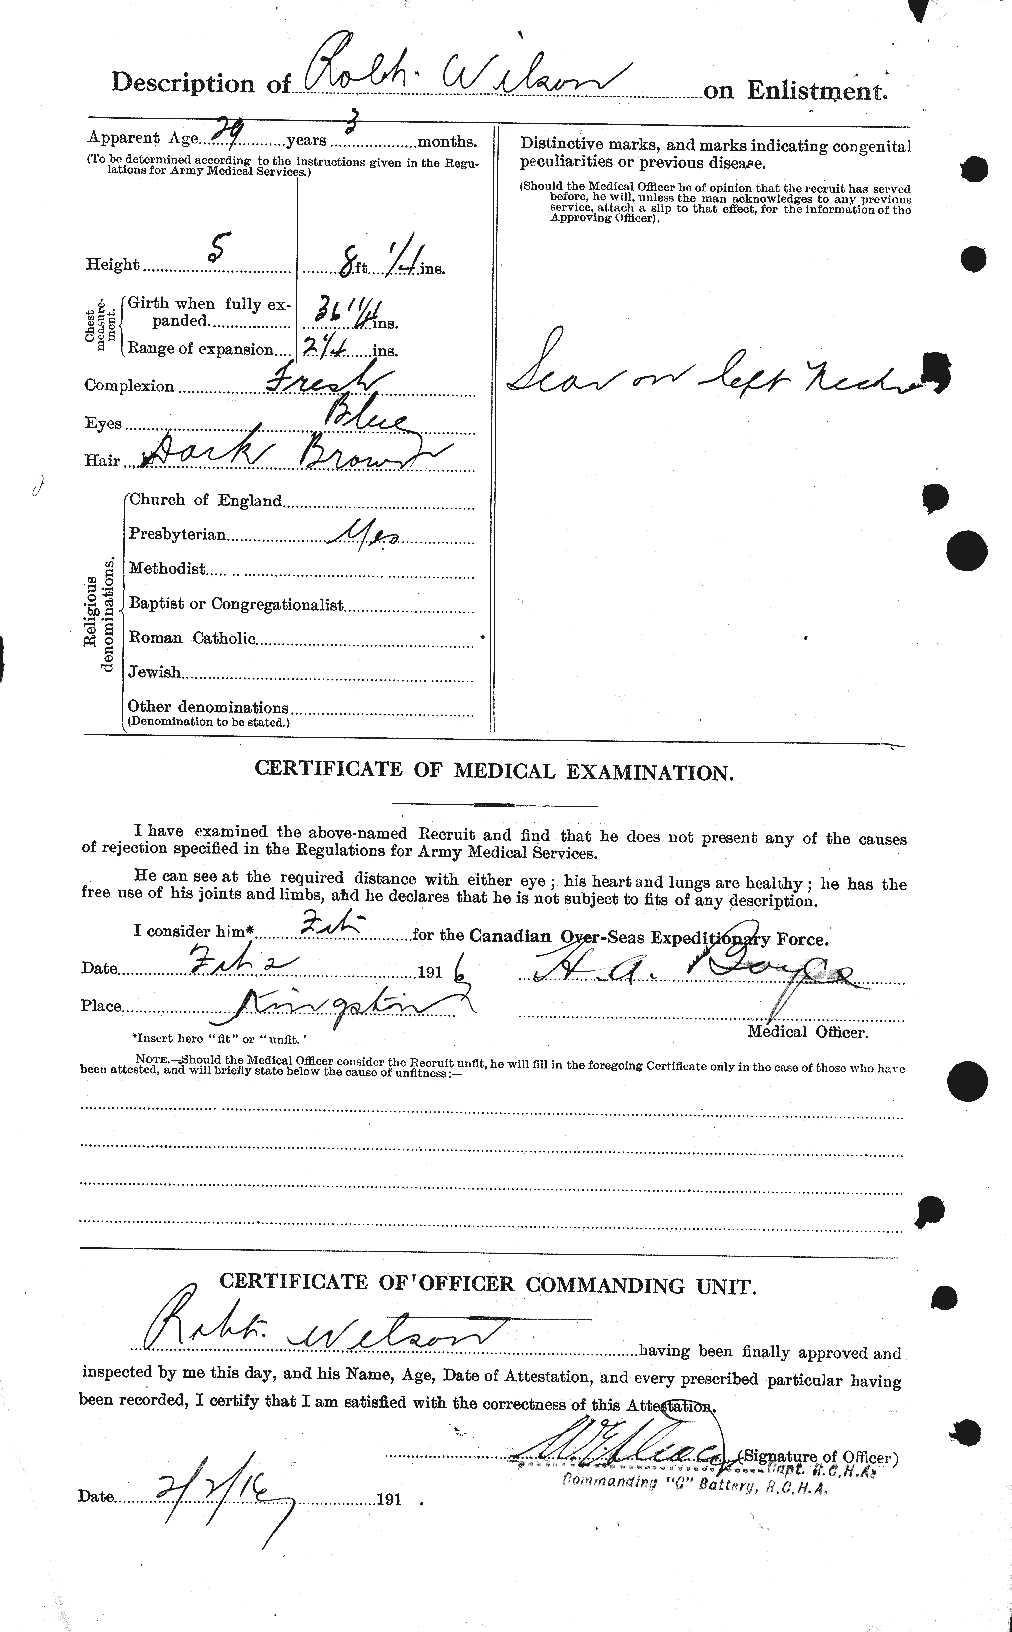 Personnel Records of the First World War - CEF 680932b